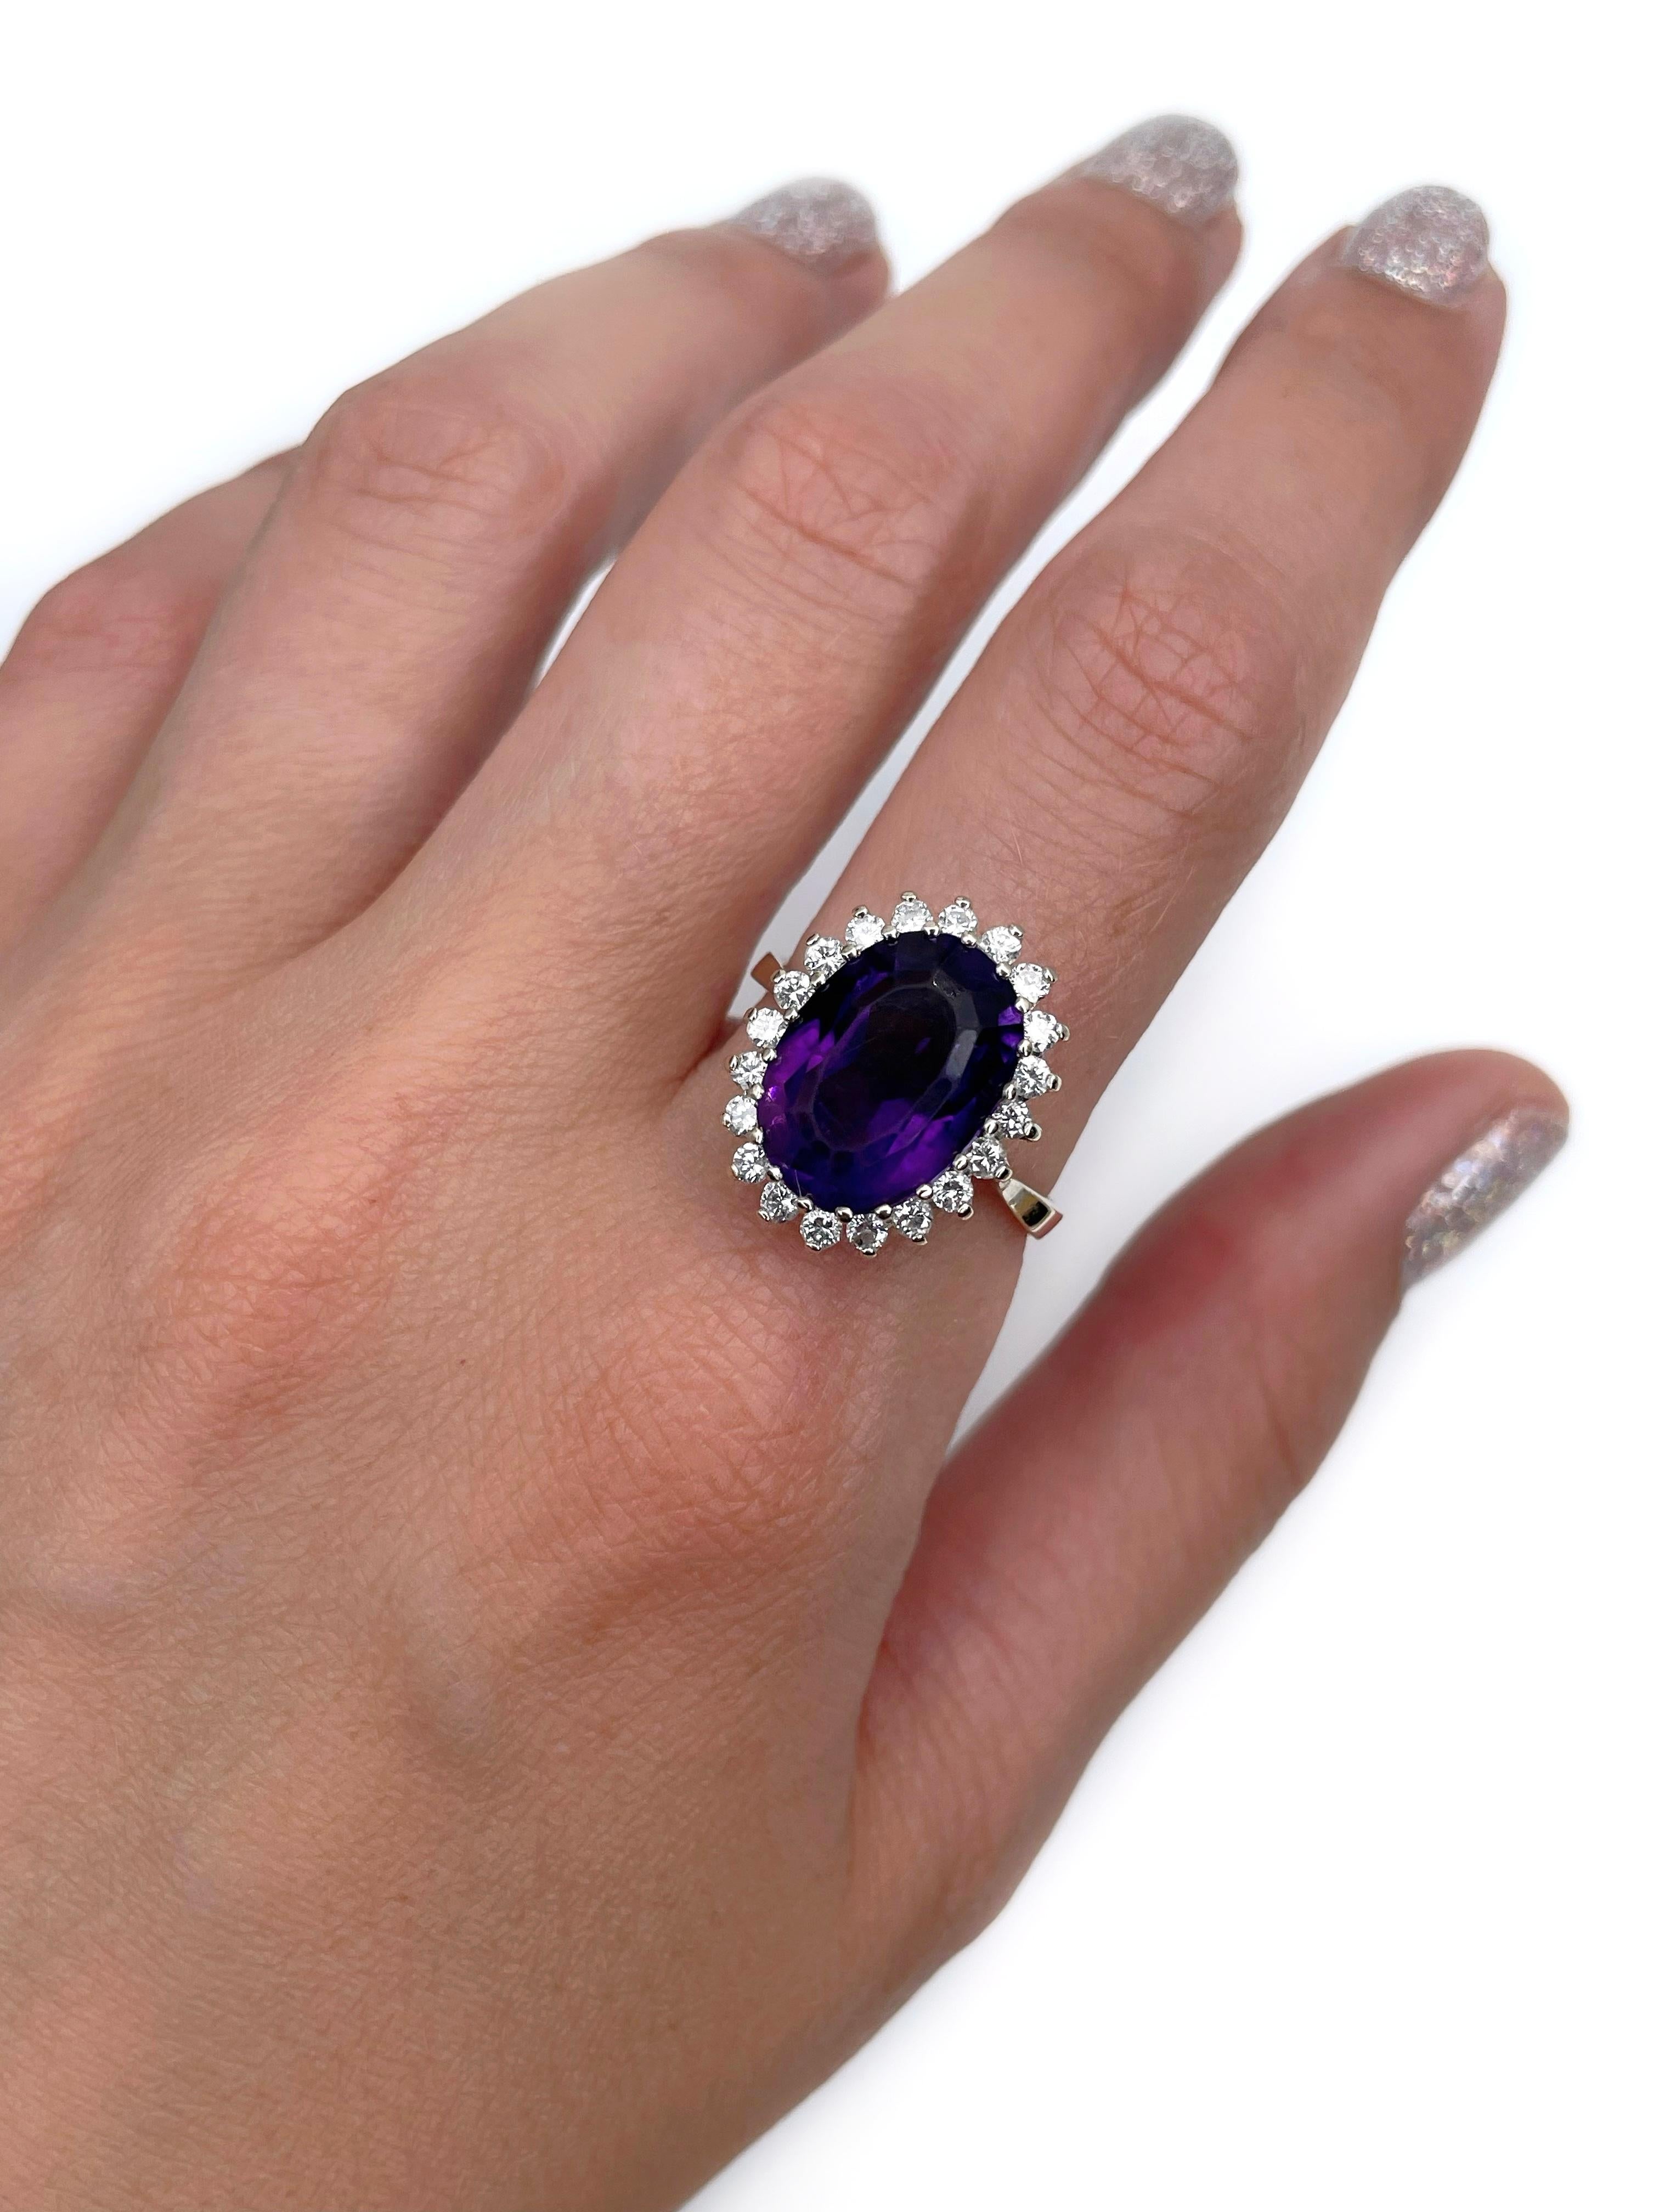 This is a vintage cluster ring crafted in 14K gold. Circa 1980. The piece features:
- Amethyst: 1pc., oval cut
- Diamonds: 20pcs., round brilliant cut, TW 0.60ct, RW-W, SI-P1

Weight: 4.91g 
Size: 18.75 (US 8.75)

IMPORTANT: please ask about the